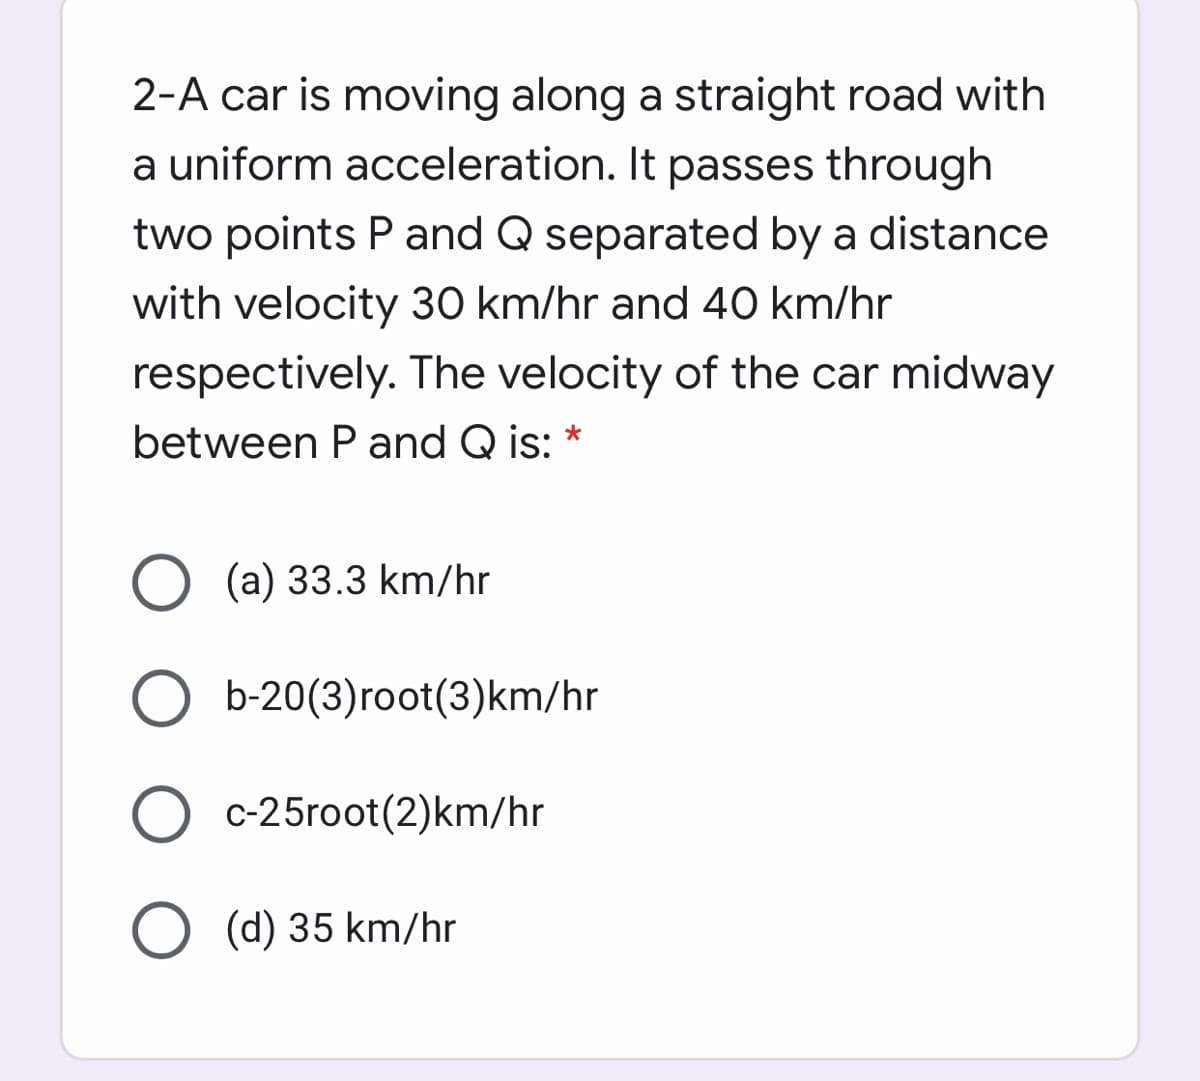 2-A car is moving along a straight road with
a uniform acceleration. It passes through
two points P and Q separated by a distance
with velocity 30 km/hr and 40 km/hr
respectively. The velocity of the car midway
between Pand Q is: *
O (a) 33.3 km/hr
O b-20(3)root(3)km/hr
c-25root(2)km/hr
(d) 35 km/hr
